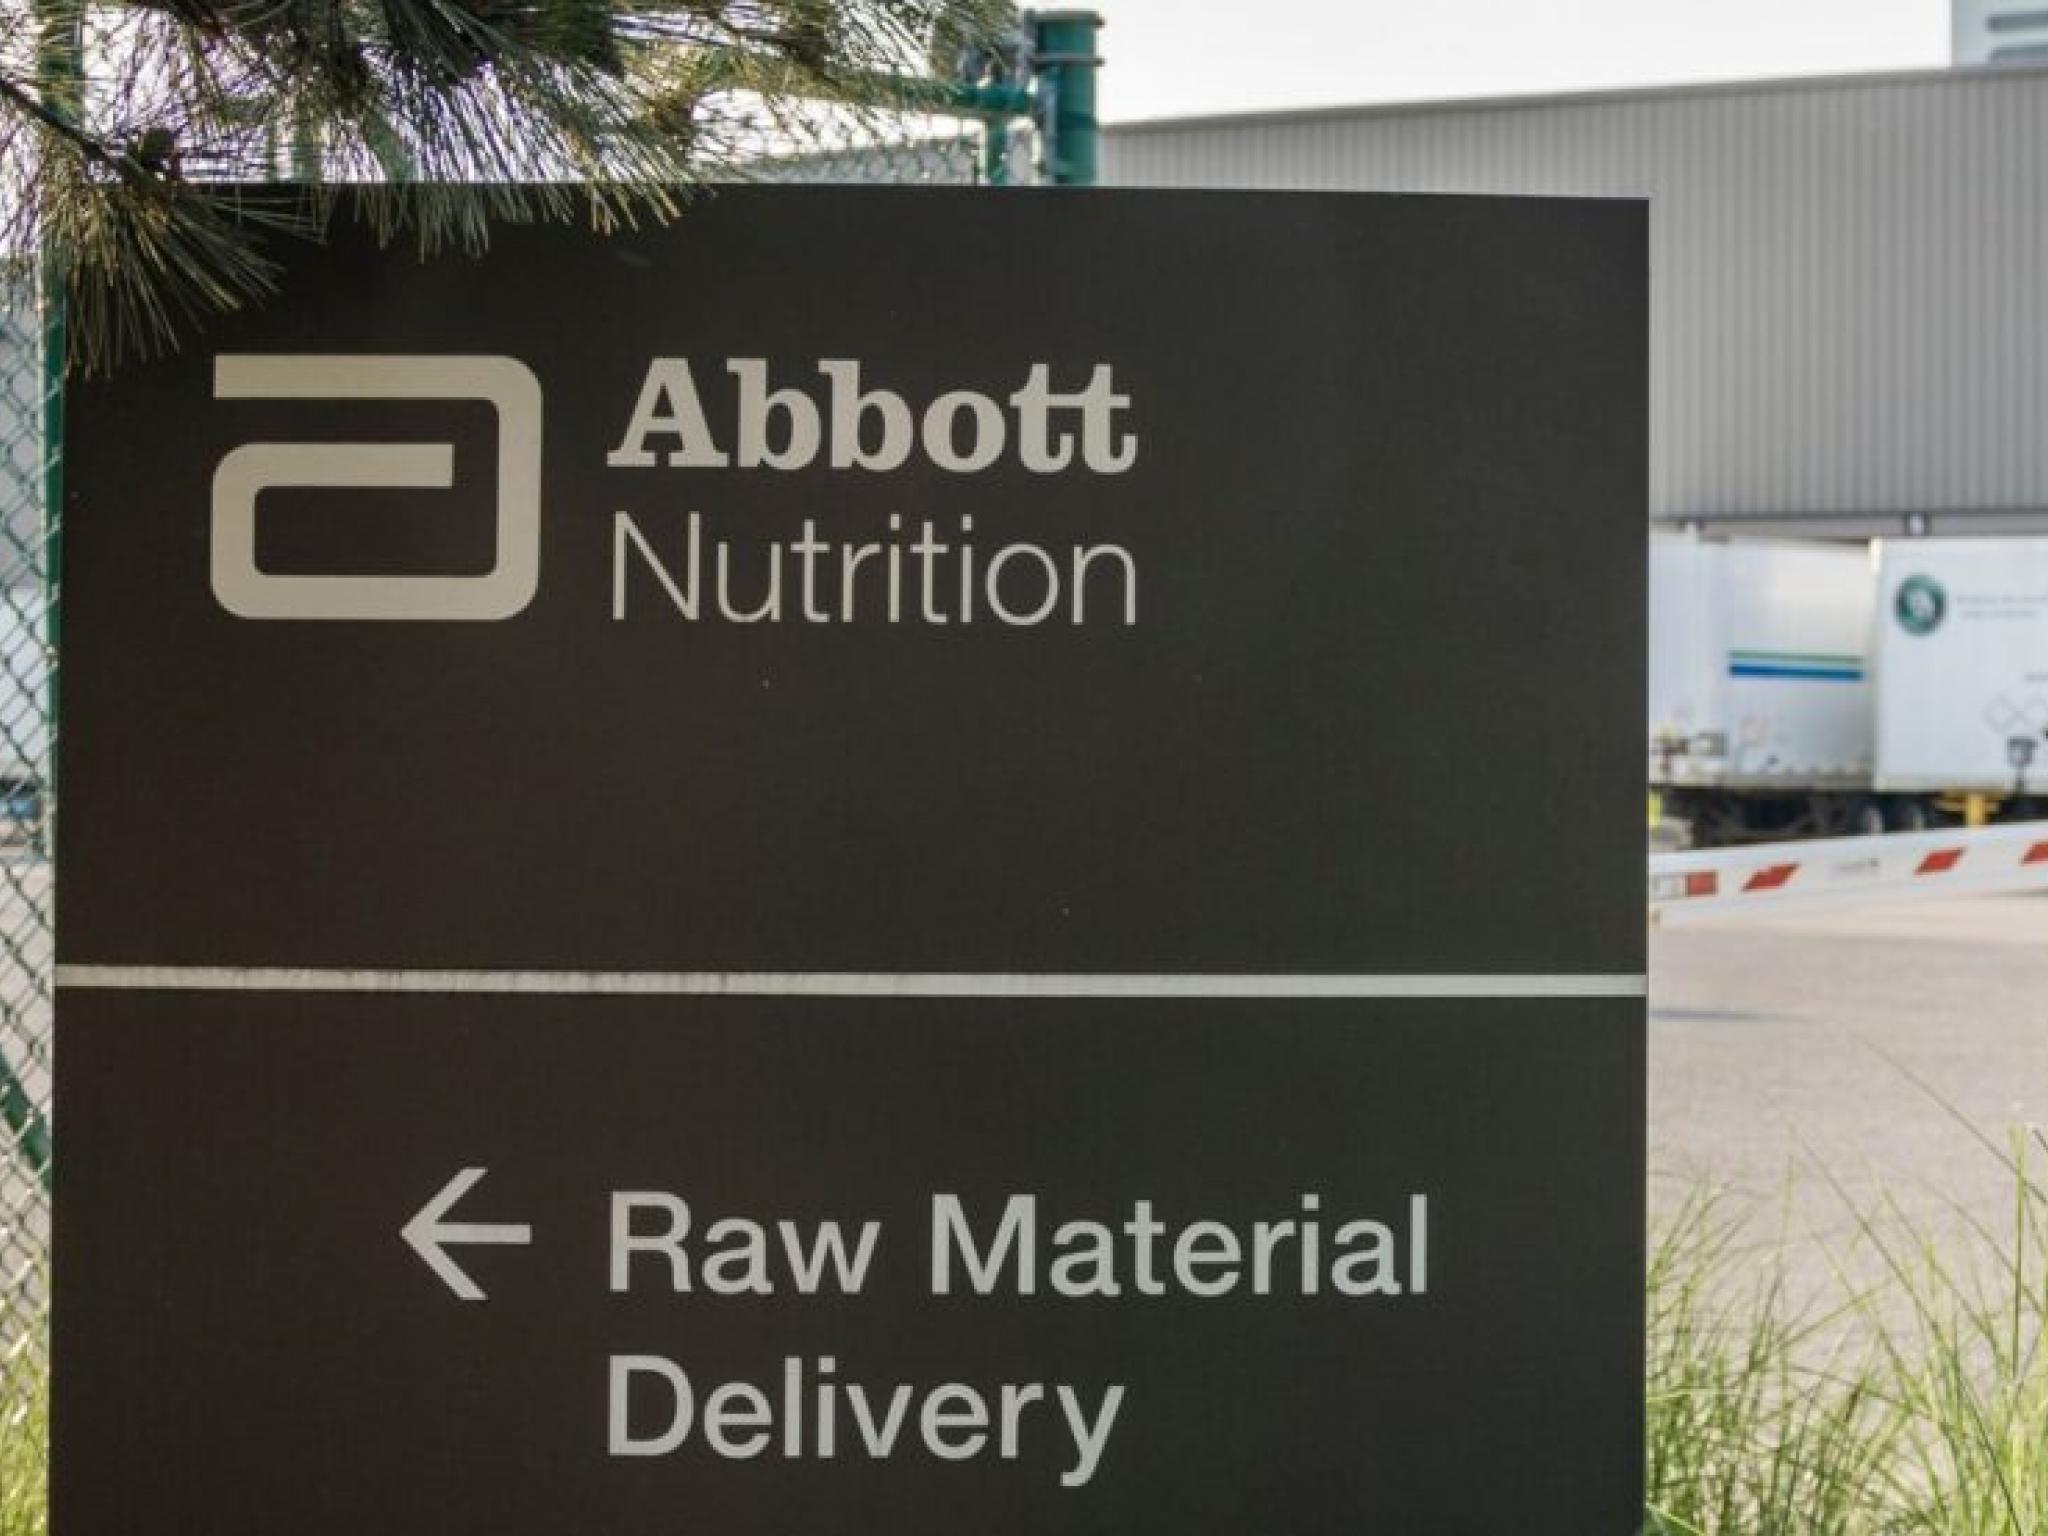  abbott-labs-q1-revenue-jumps-on-strong-medical-devices-sales-company-boosts-annual-guidance 